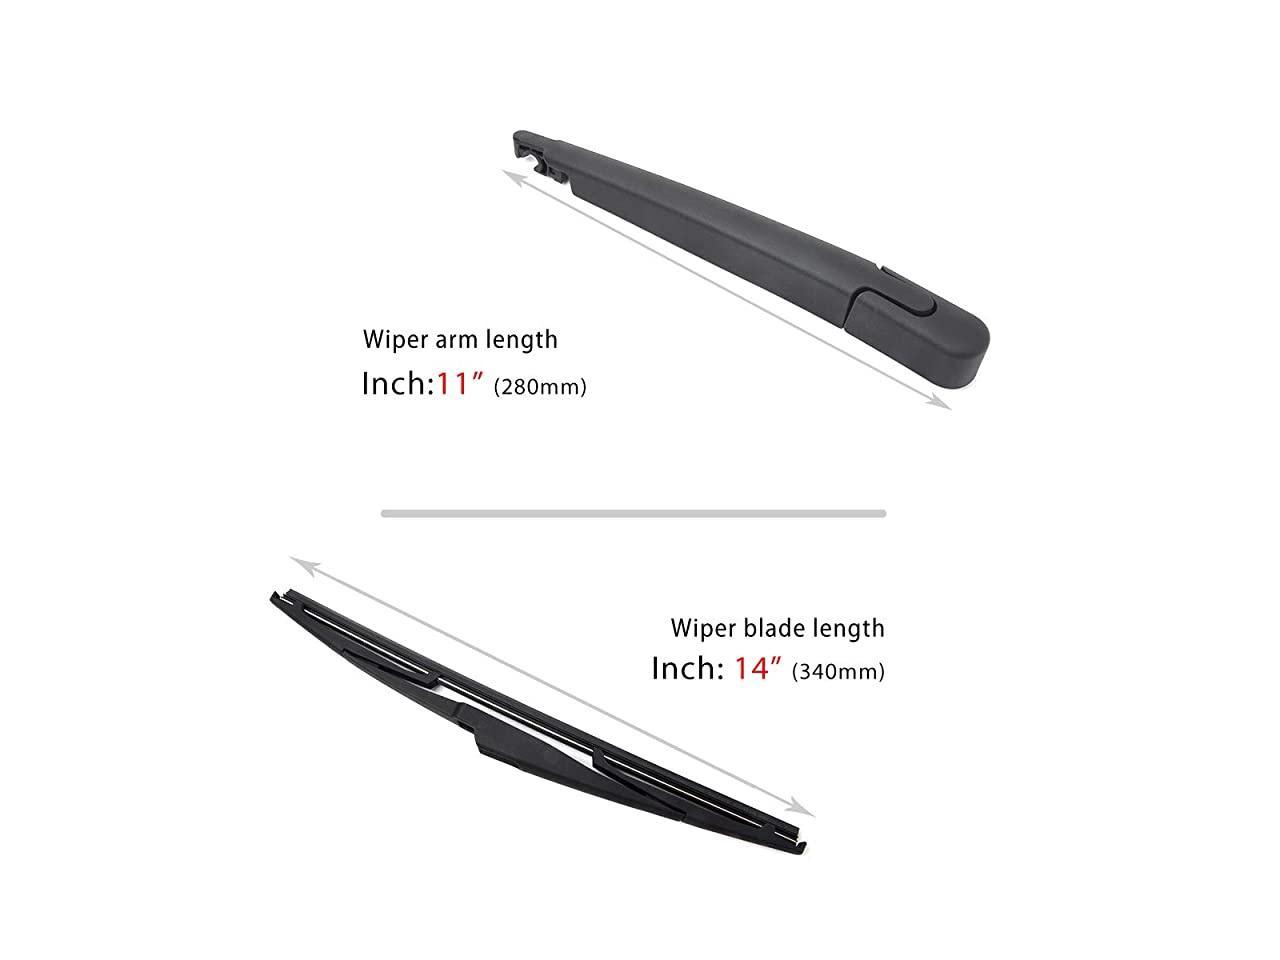 Windshield Wiper Arm Blade Set for Hyundai Santa Fe 2013-2017 - Newegg.com 2017 Hyundai Santa Fe Windshield Wiper Replacement